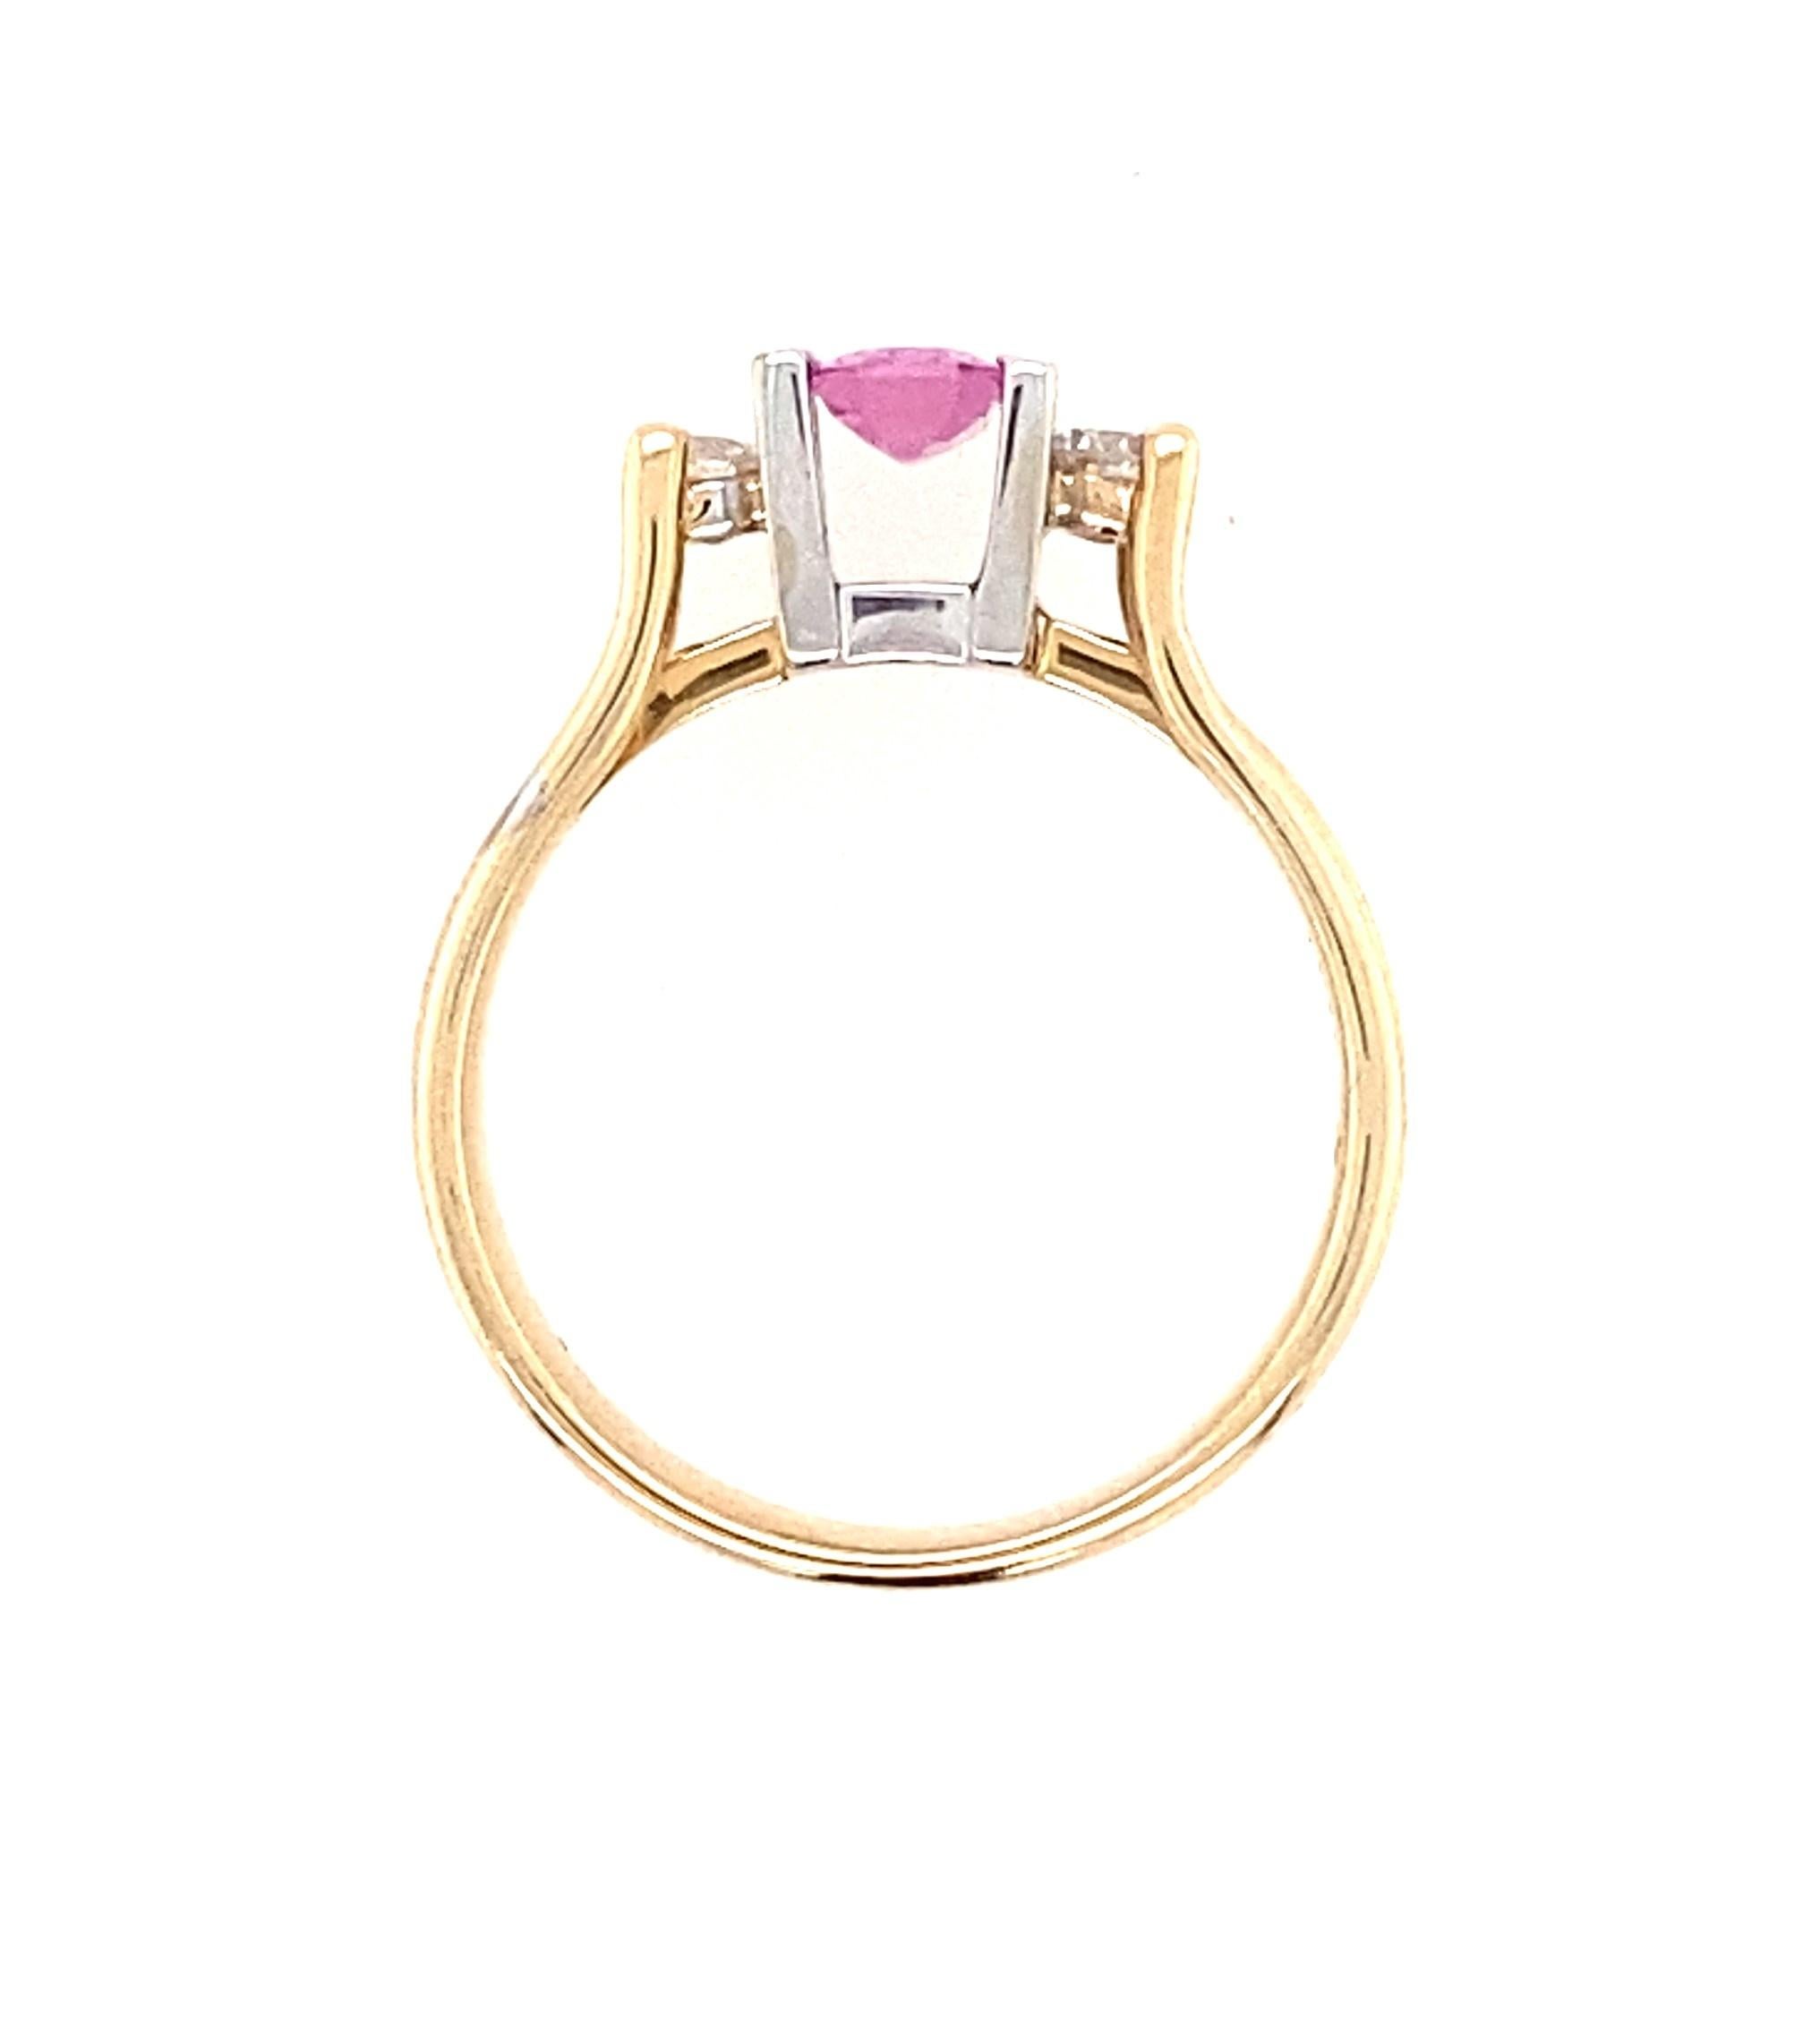 Emerald Cut 14K White and Yellow Gold Pink Sapphire and Diamond Ring